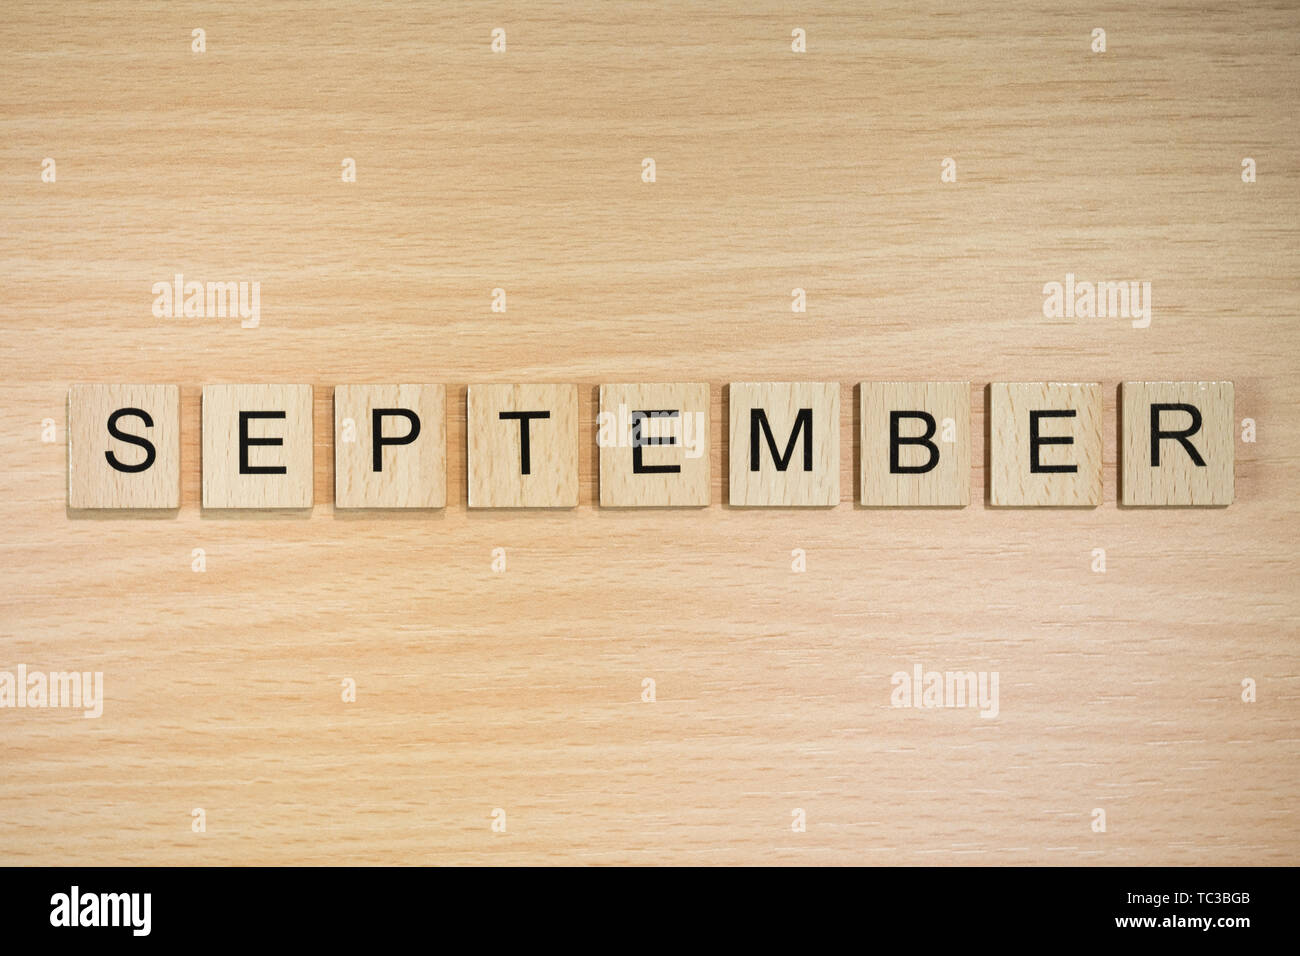 The word September, spelt out using wooden tiles on a wood effect background. Stock Photo